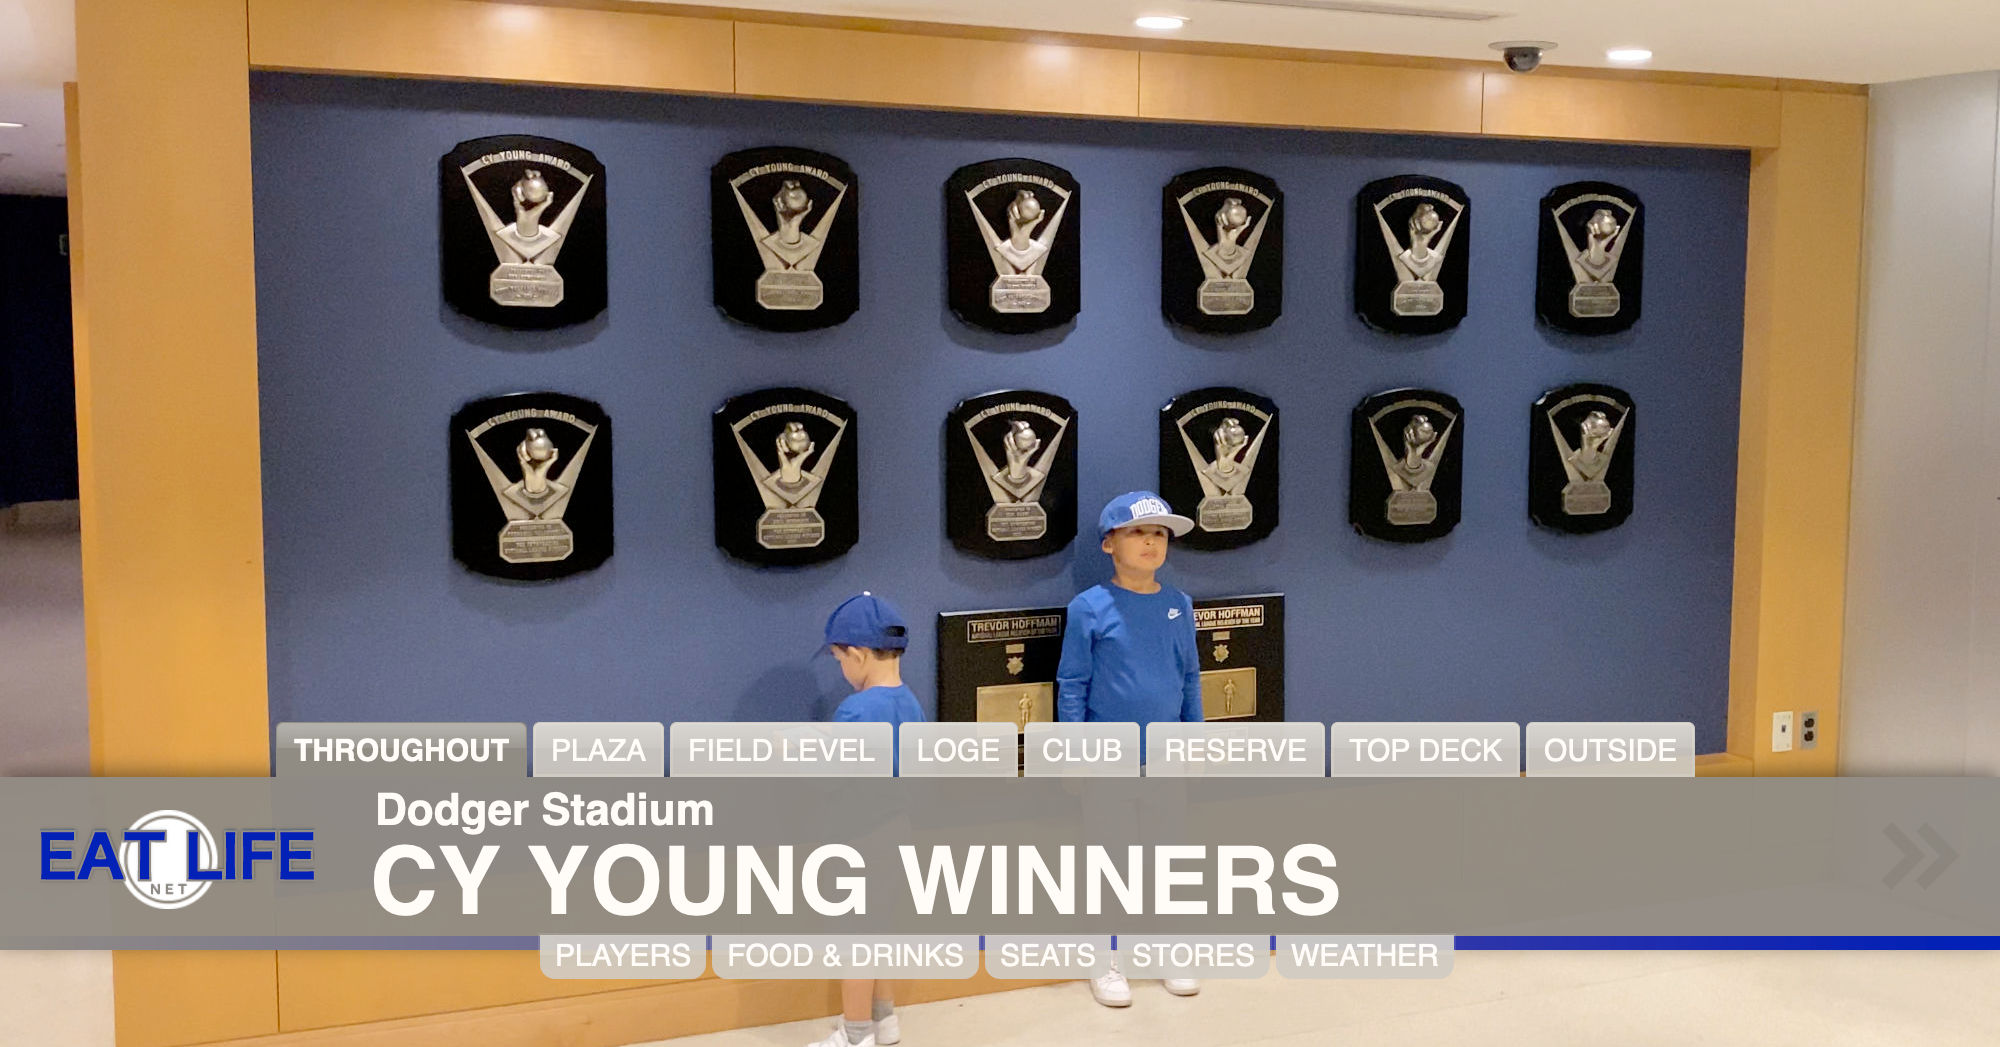 Cy Young Award Winners at Dodger Stadium